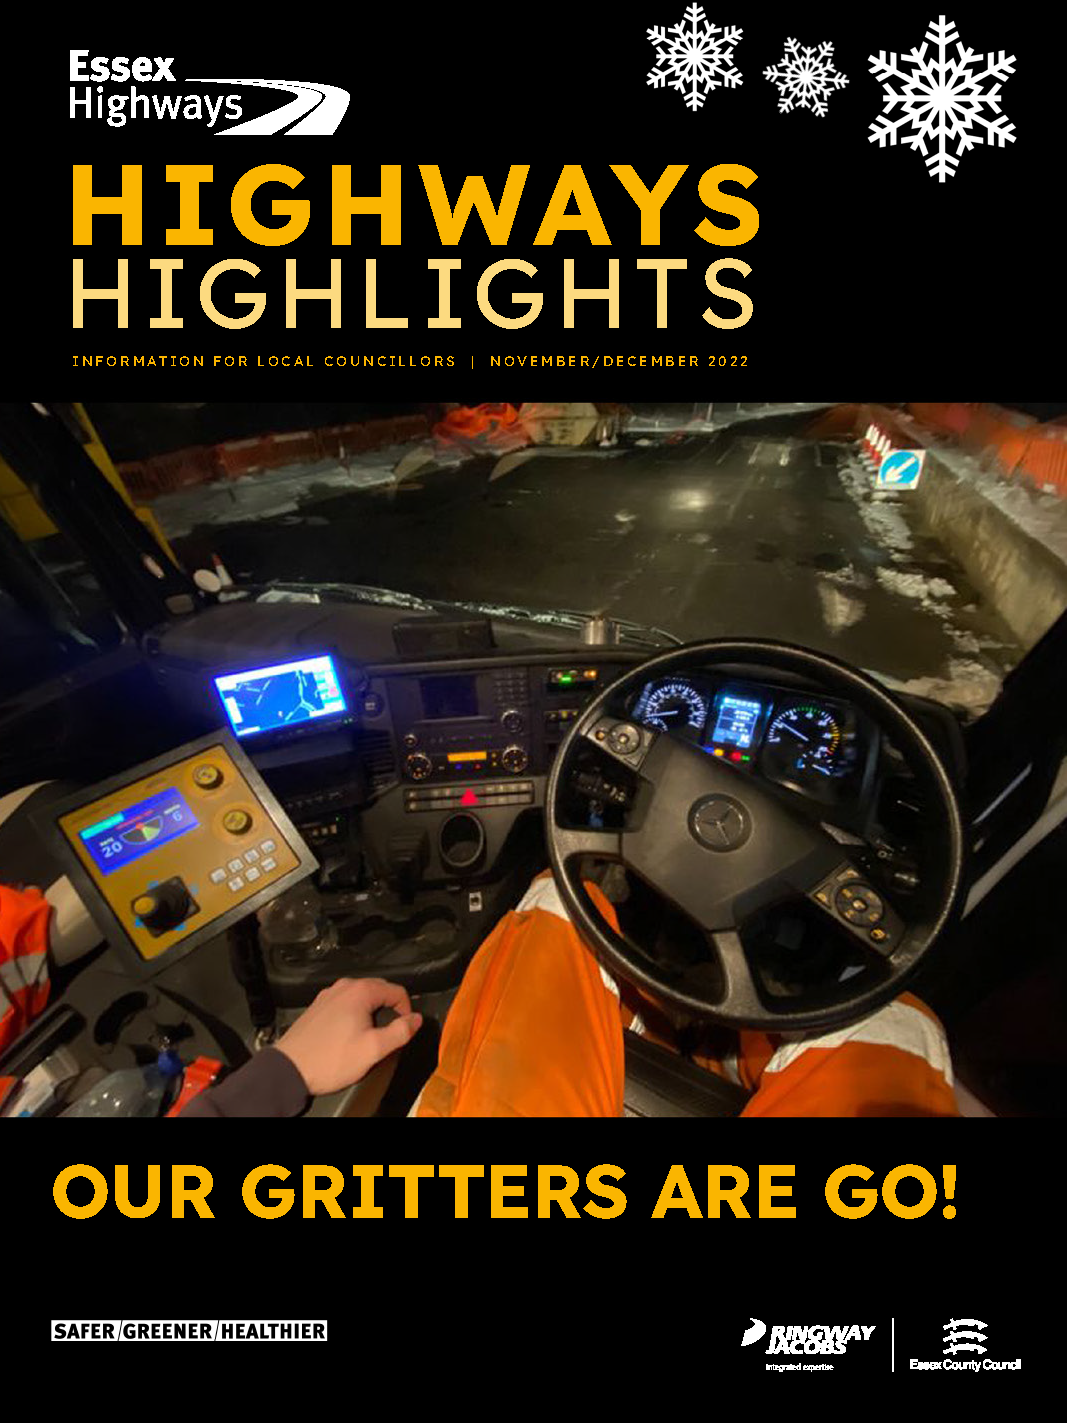 Cover of Highways Highlights November / December 2022 showing an image of the inside of a gritter cab